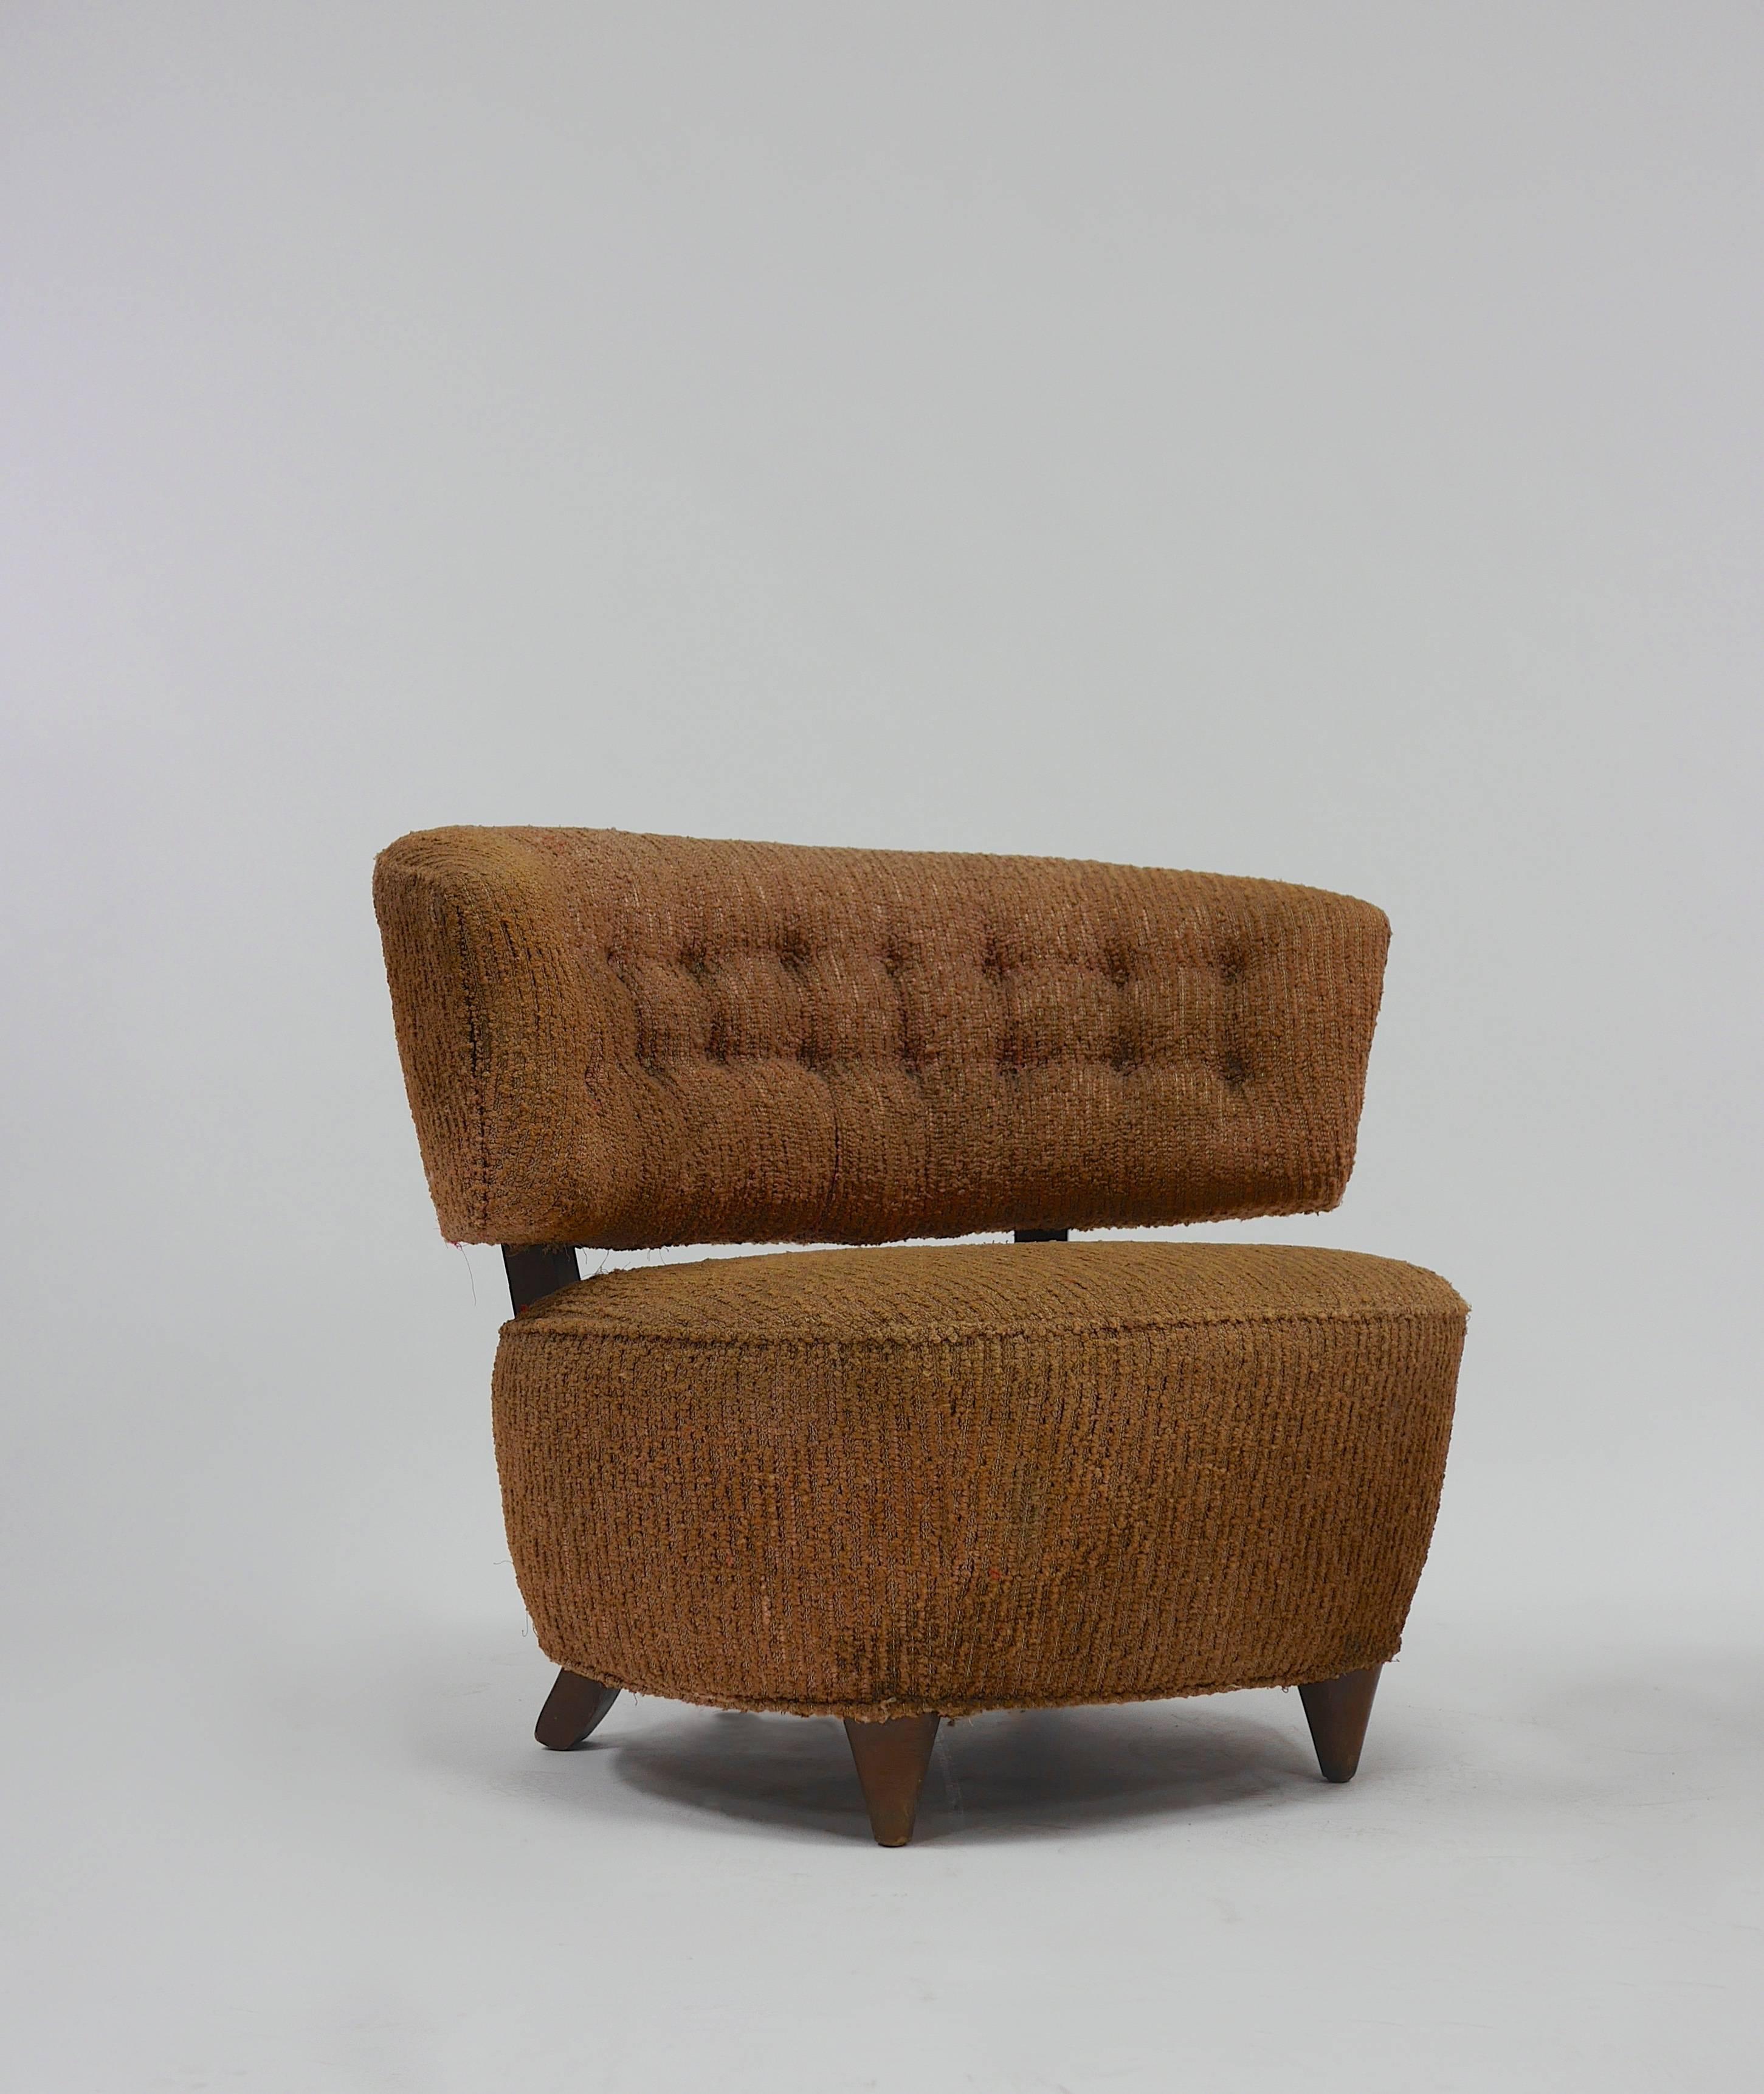 Pair of Gilbert Rohde slipper lounge chairs.
Herman Miller, circa 1940s.
Original condition.
Low, stylish and very comfortable.
         